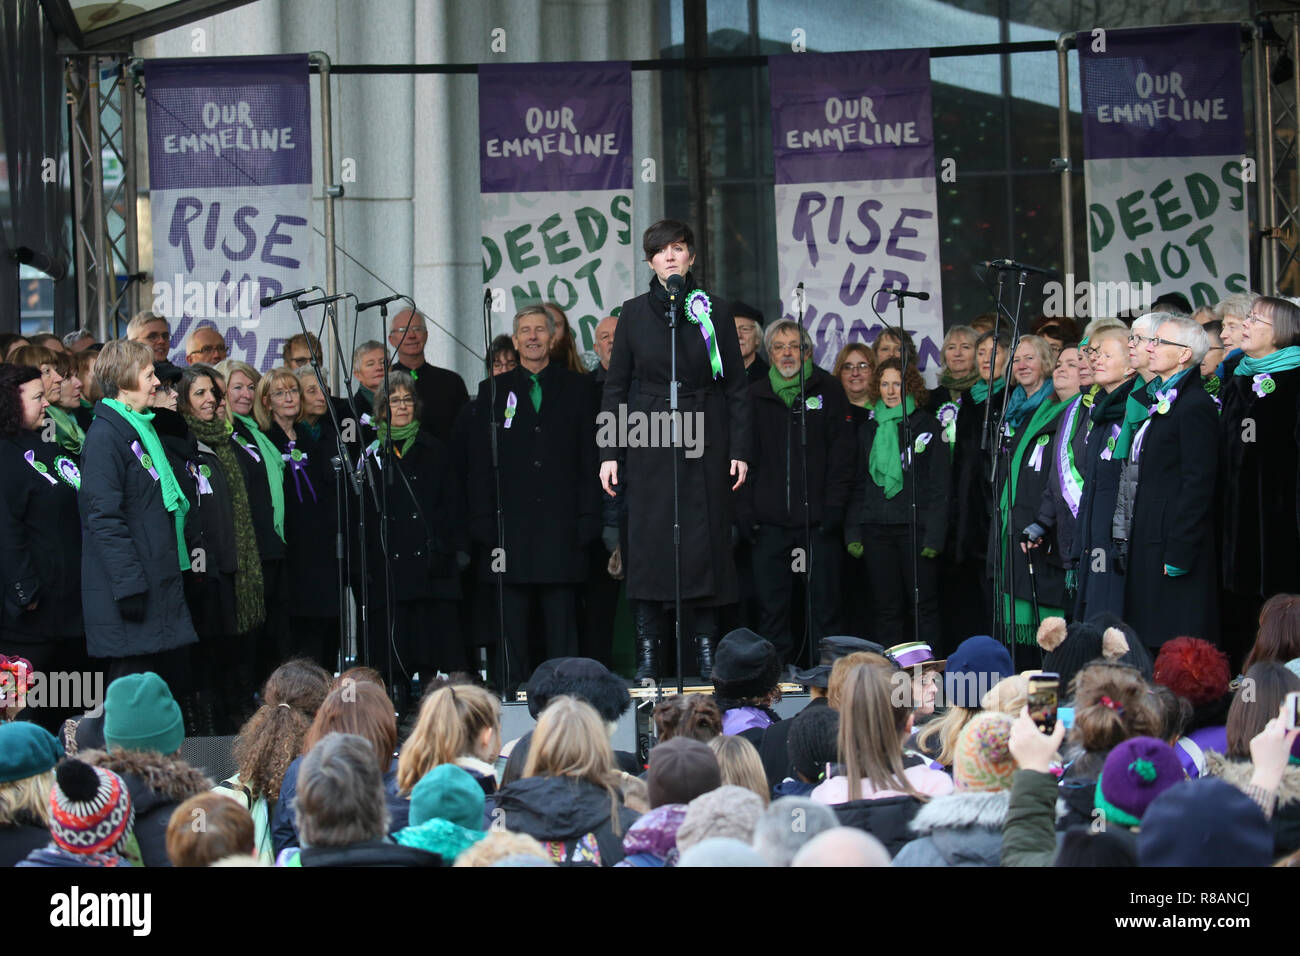 Manchester, UK. 14th Dec 2018. A choir performs at  the unveiling of a statue of Suffragette Emmeline Pankhurst by sculpture designer Hazel Reeves. The day marks 100 years since Women won the vote.Manchester, UK, 14th December 2018 Credit: Barbara Cook/Alamy Live News Stock Photo